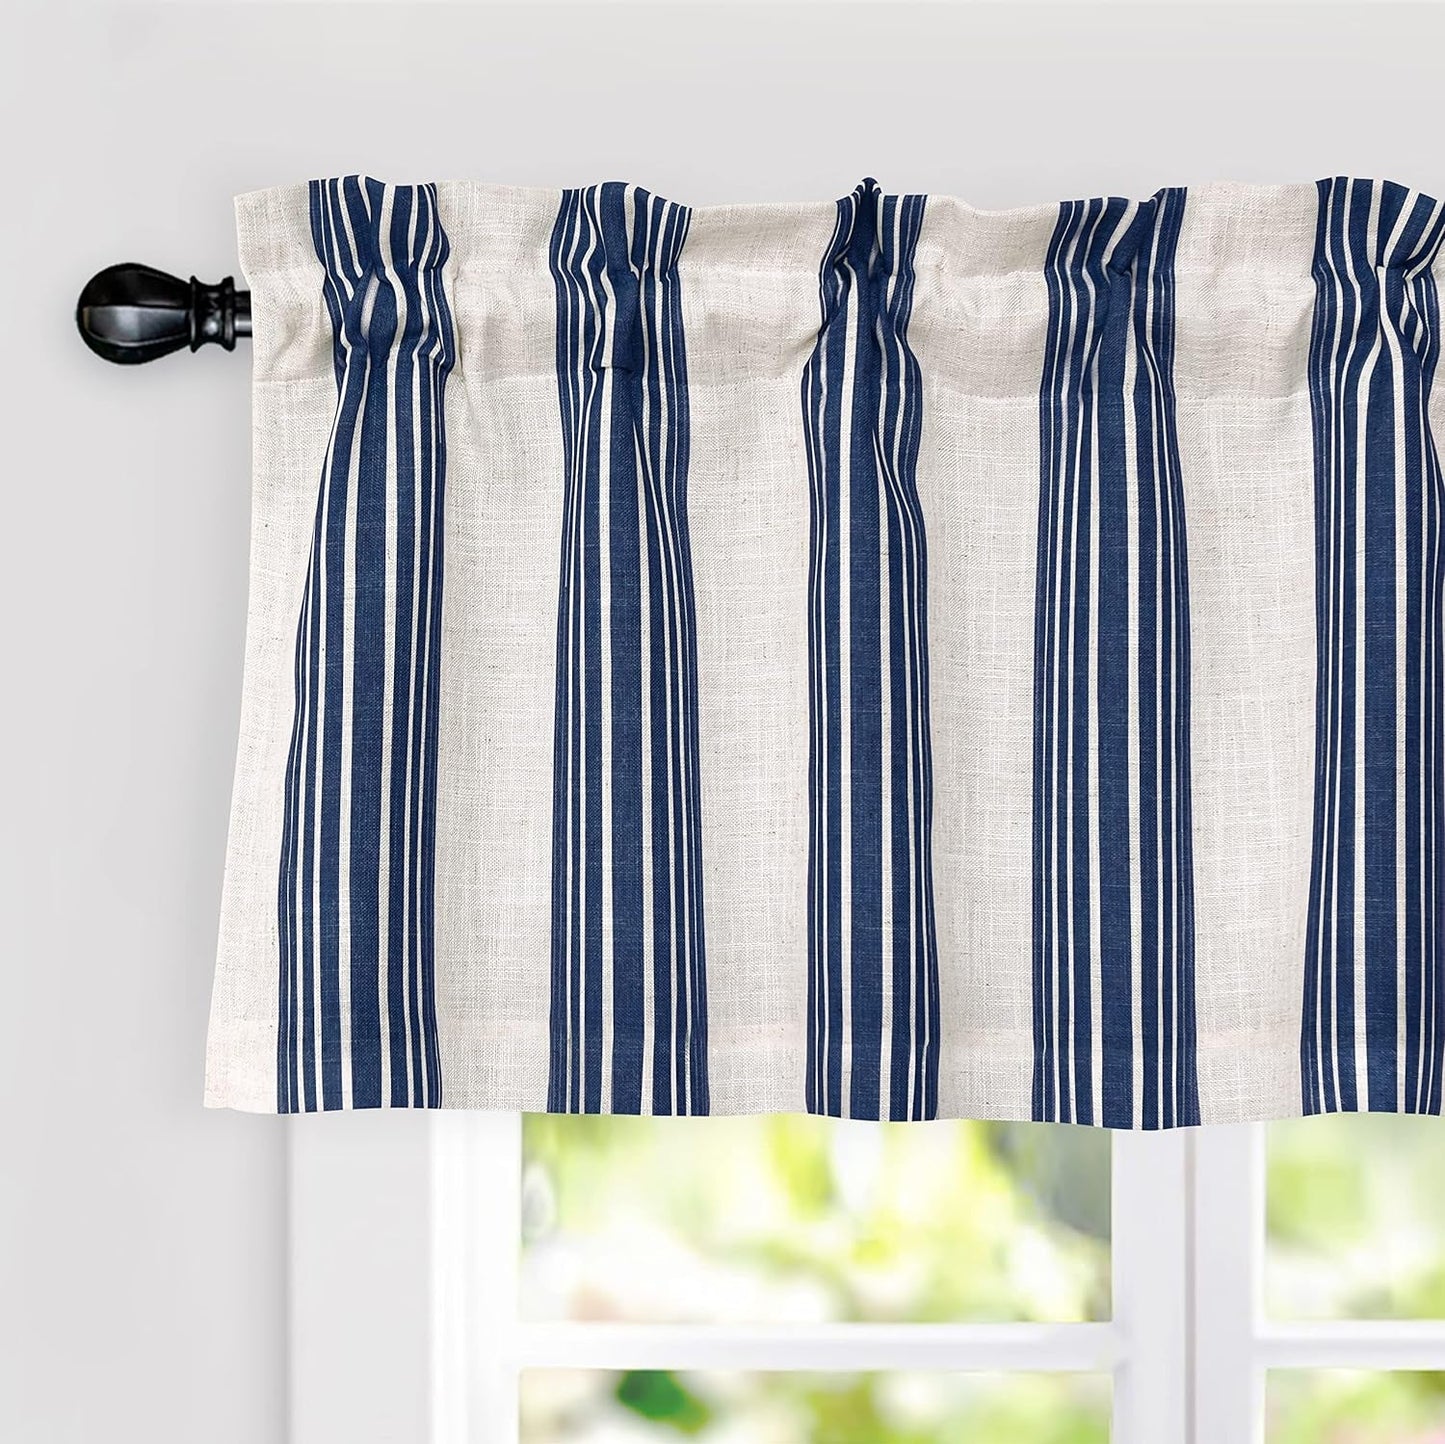 Driftaway Chris Vertical Striped Pattern Linen Blend Thermal Insulated Blackout Linen Window Curtain Valance Rod Pocket Lined Single 52 Inch by 18 Inch plus 2 Inch Header Jade Gray